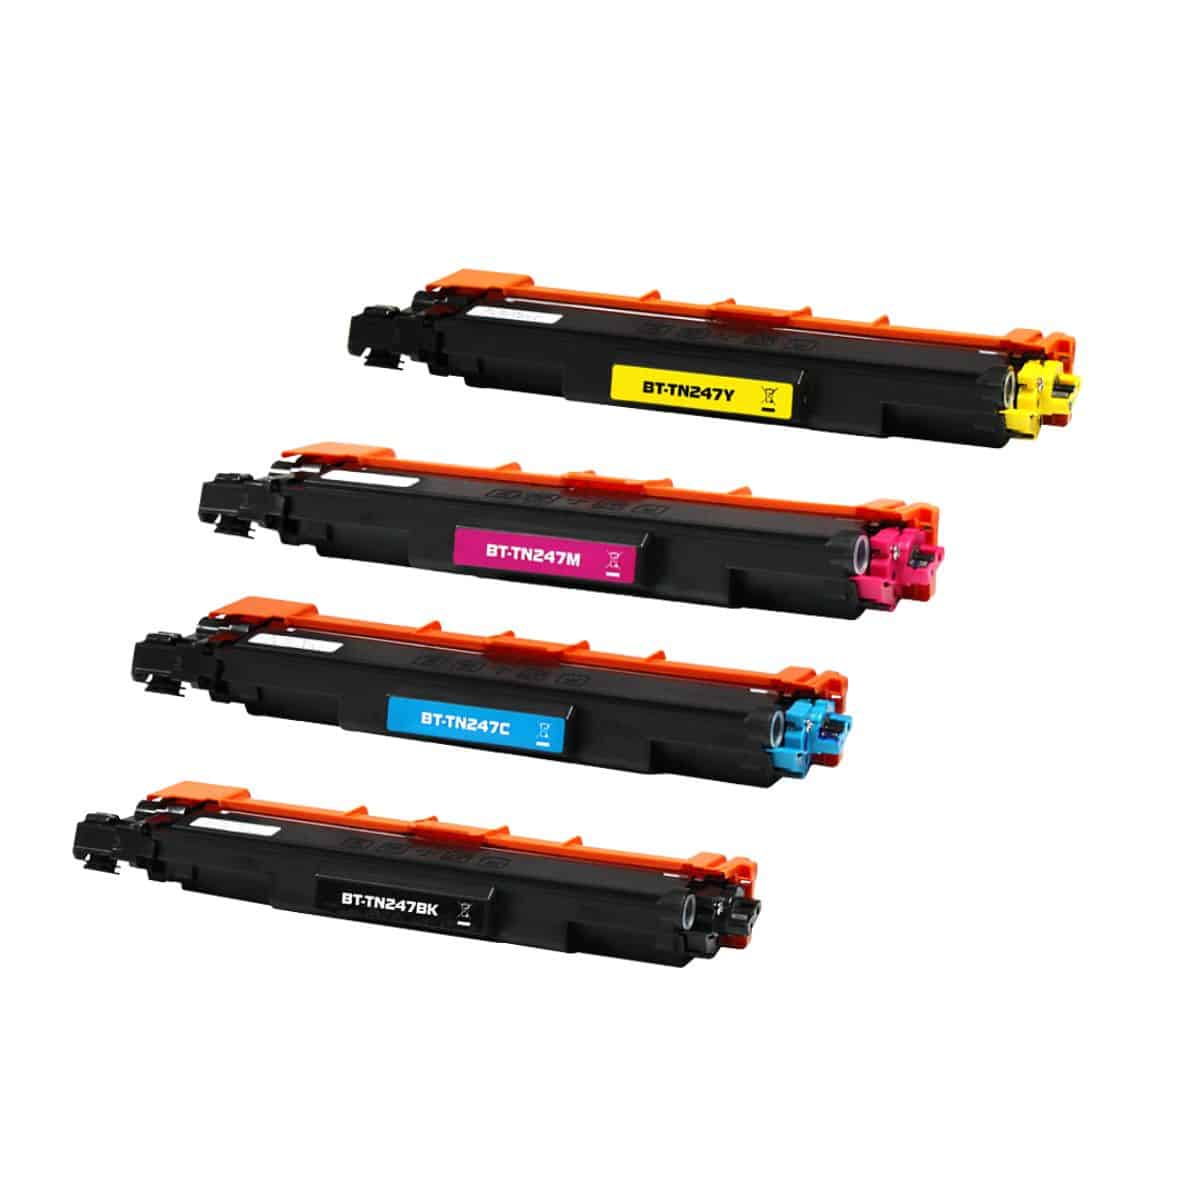 https://www.mondialcartouche.com/5621-product_zoom/pack-tn-247-xl-toner-laser-compatible-brother-4-couleurs.jpg